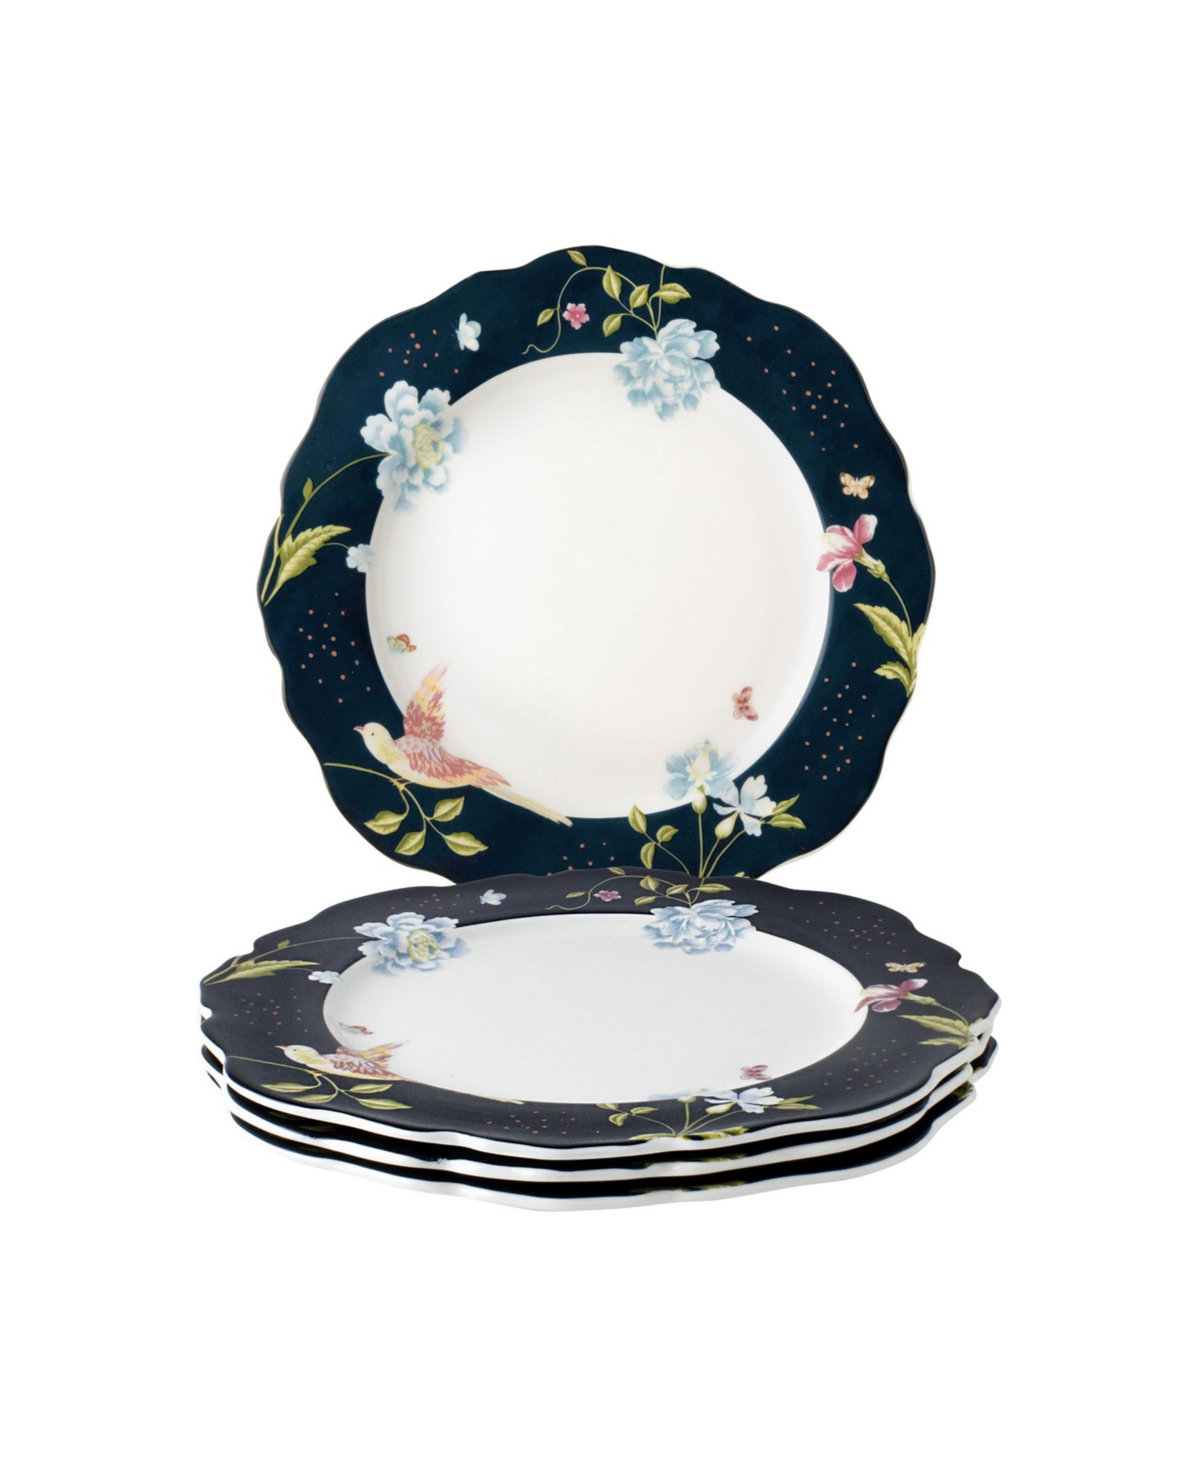 LAURA ASHLEY HERITAGE COLLECTABLES MIDNIGHT UNI IRREGULAR PLATES IN GIFT BOX, SET OF 4